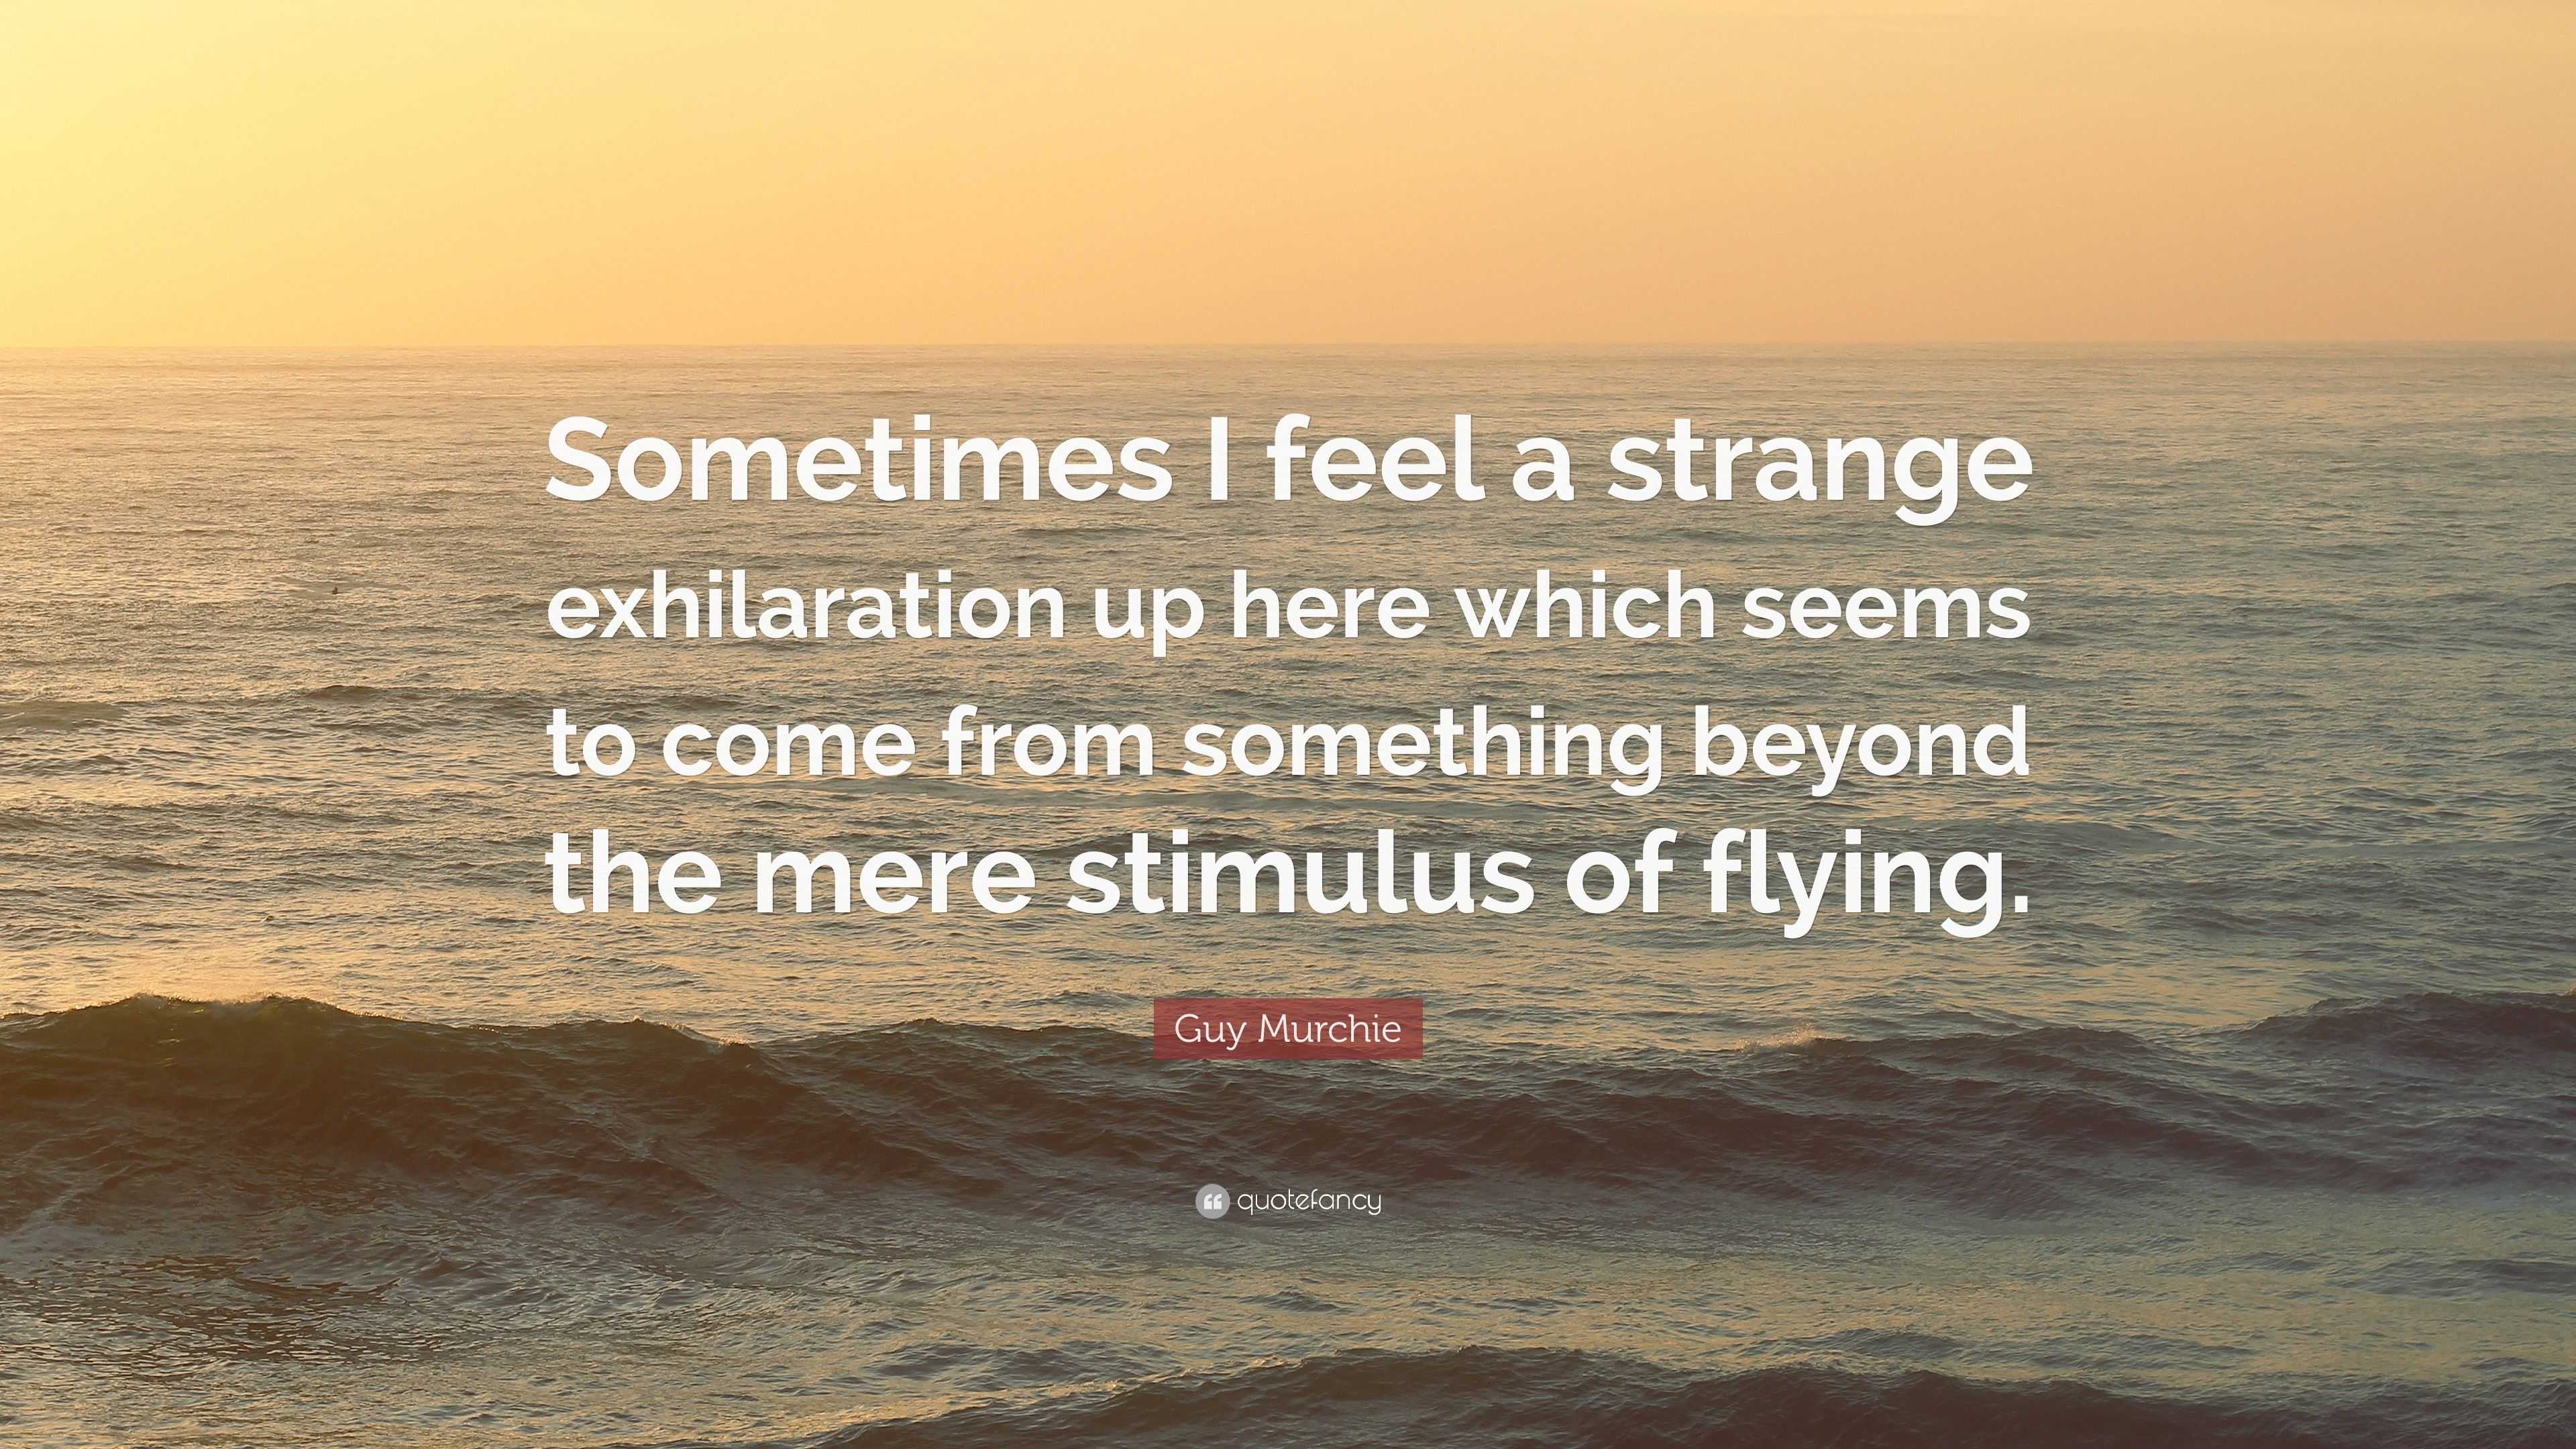 Guy Murchie Quote: “Sometimes I feel a strange exhilaration up here ...